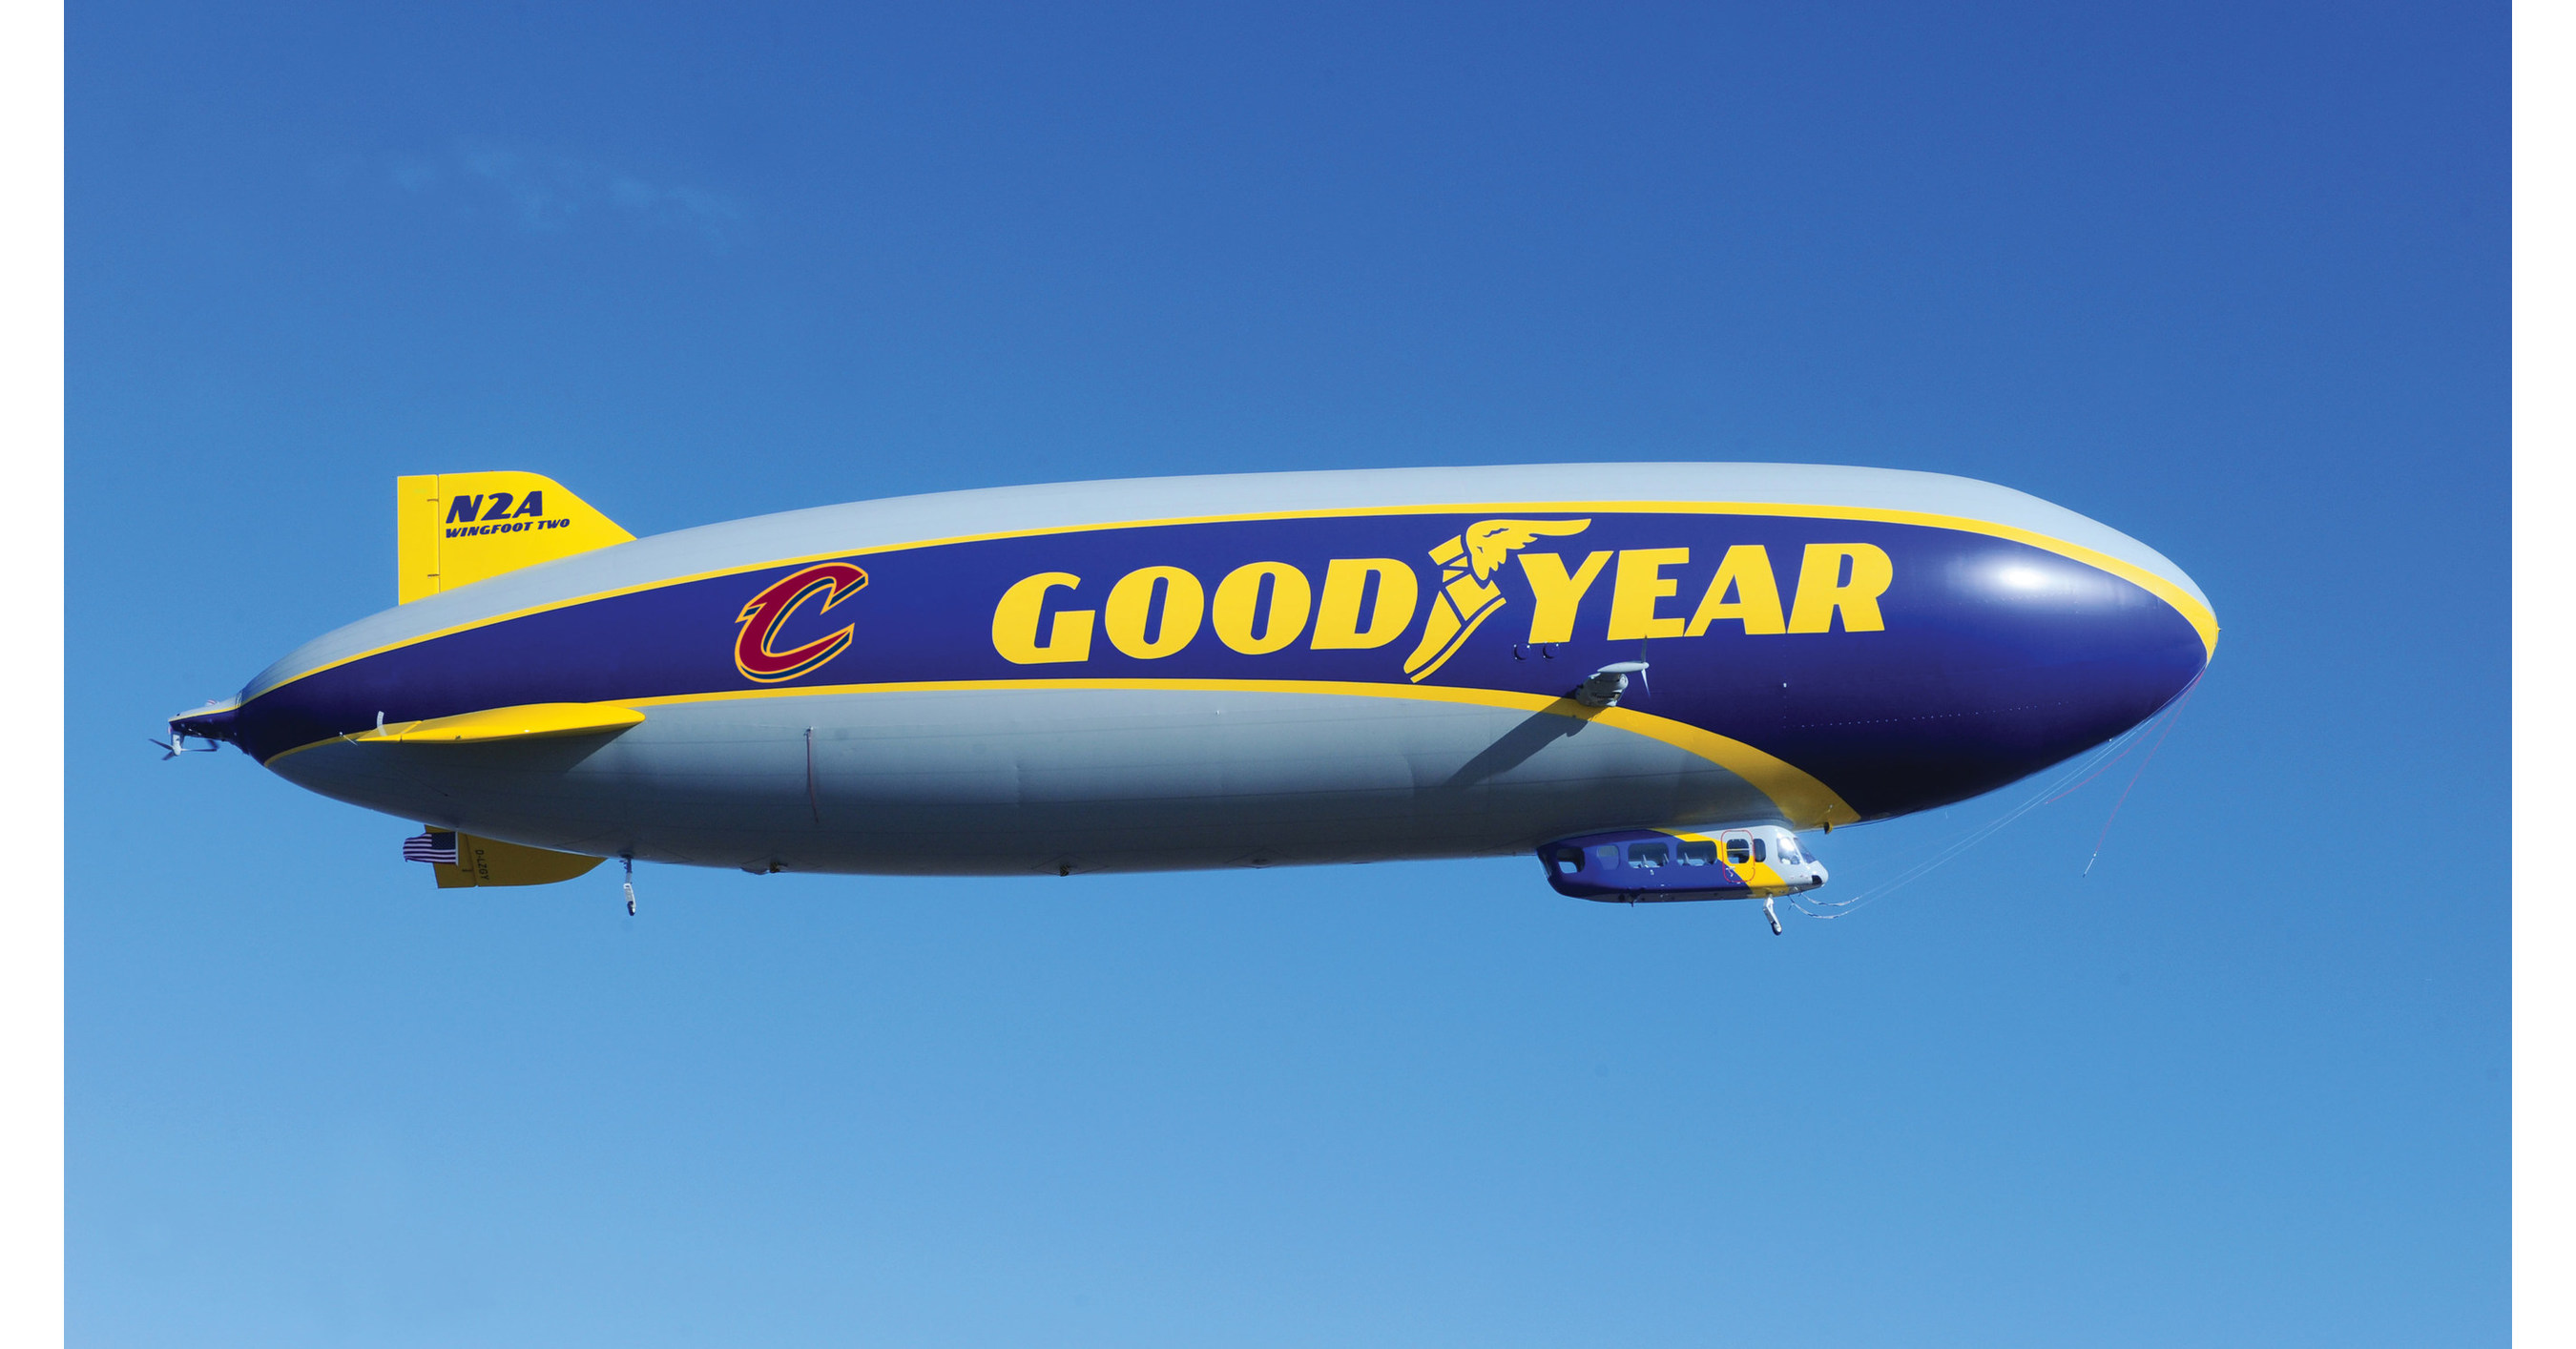 Goodyear Blimp on X: You can't be too careful nowadays. / X